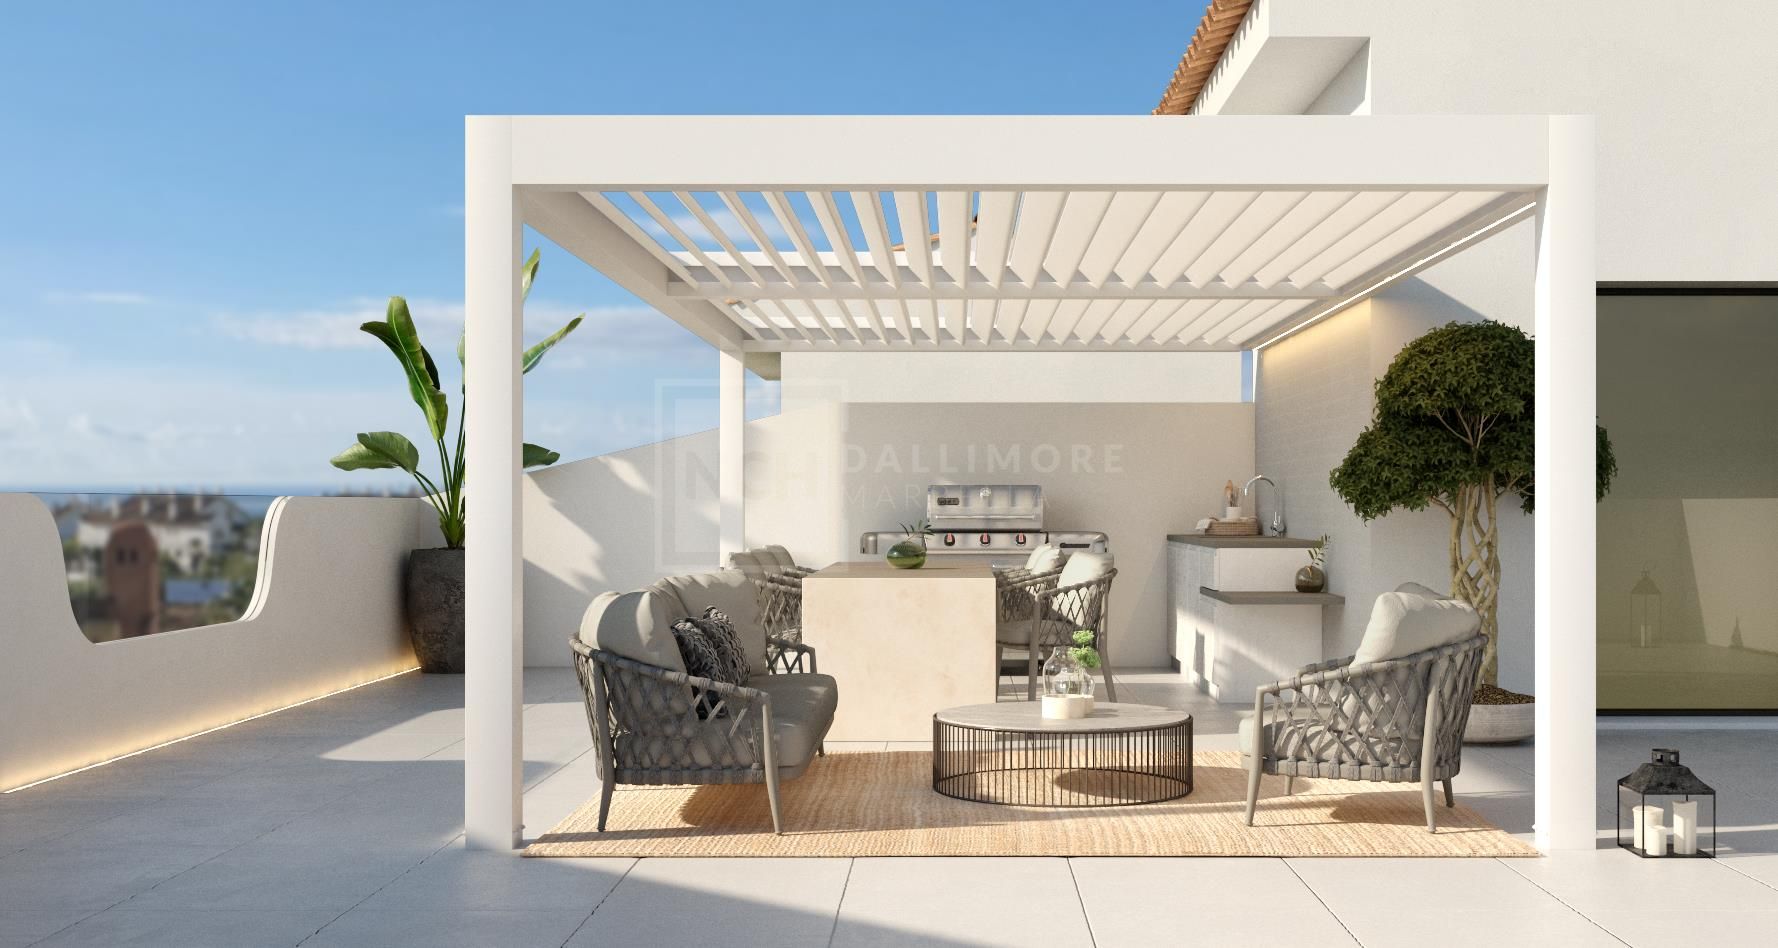 BRAND NEW TOWNHOUSE OVER 4 FLOORS ON THE GOLDEN MILE, MARBELLA